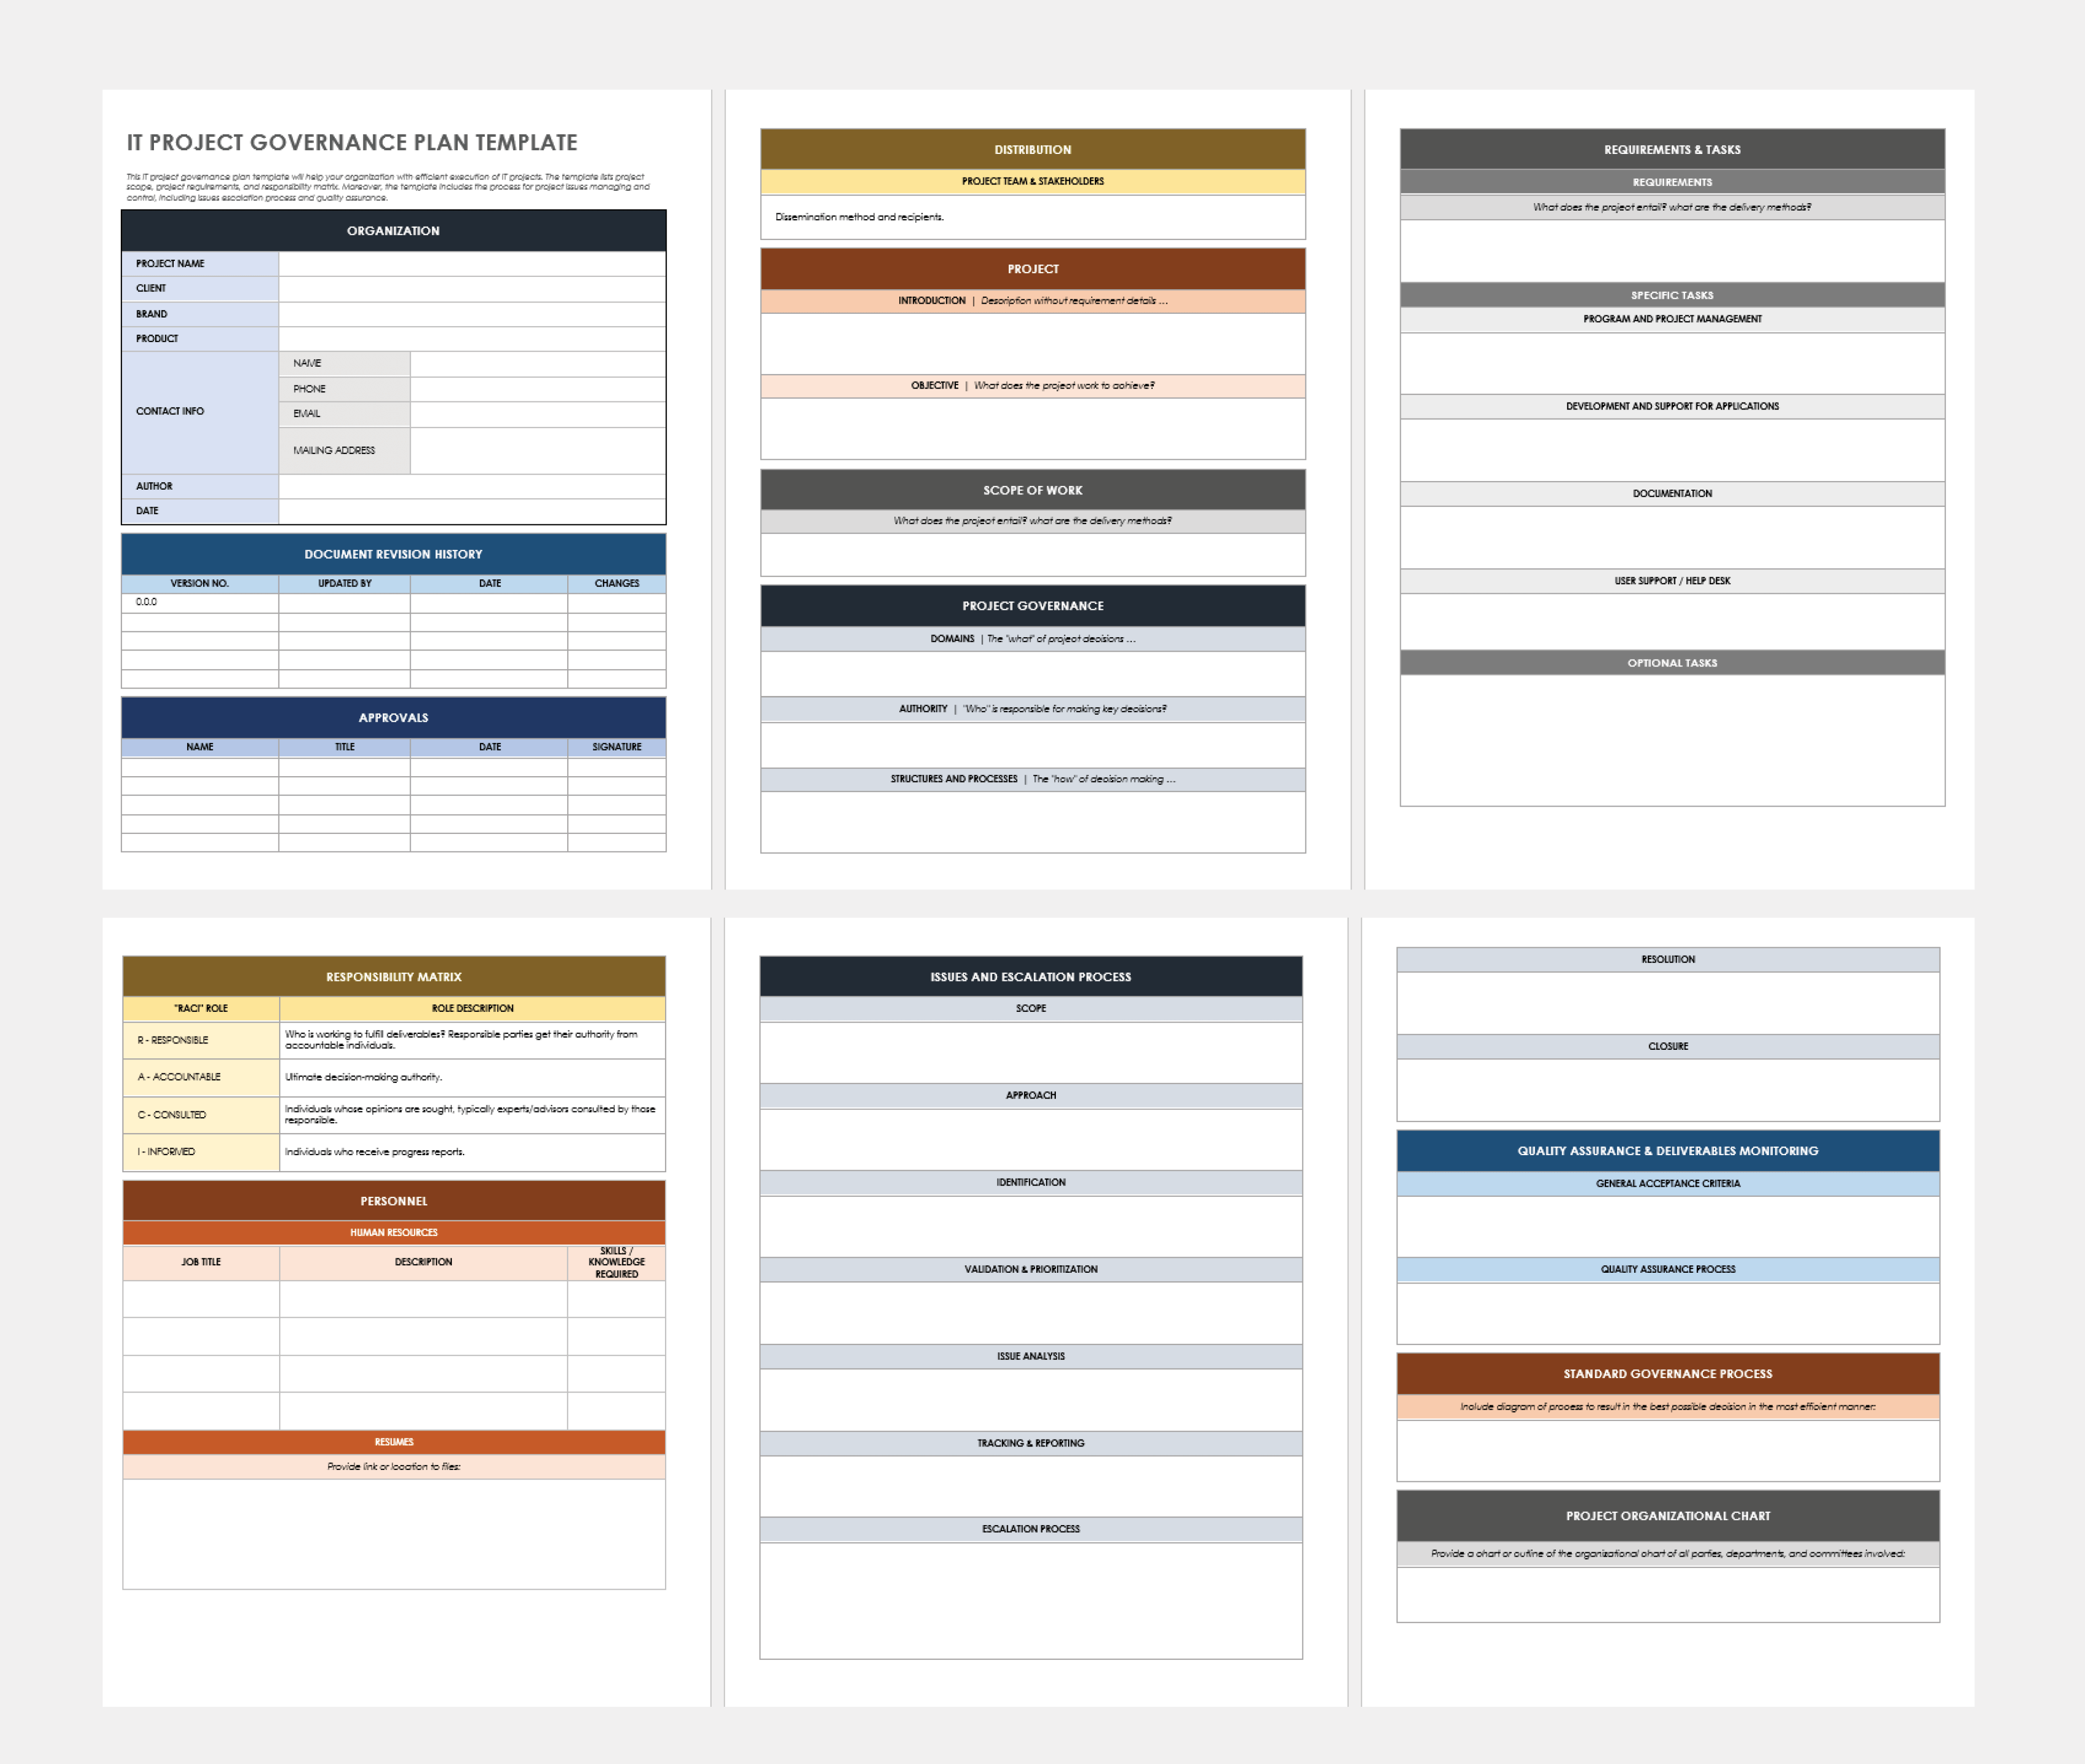 IT Project Governance Plan Template